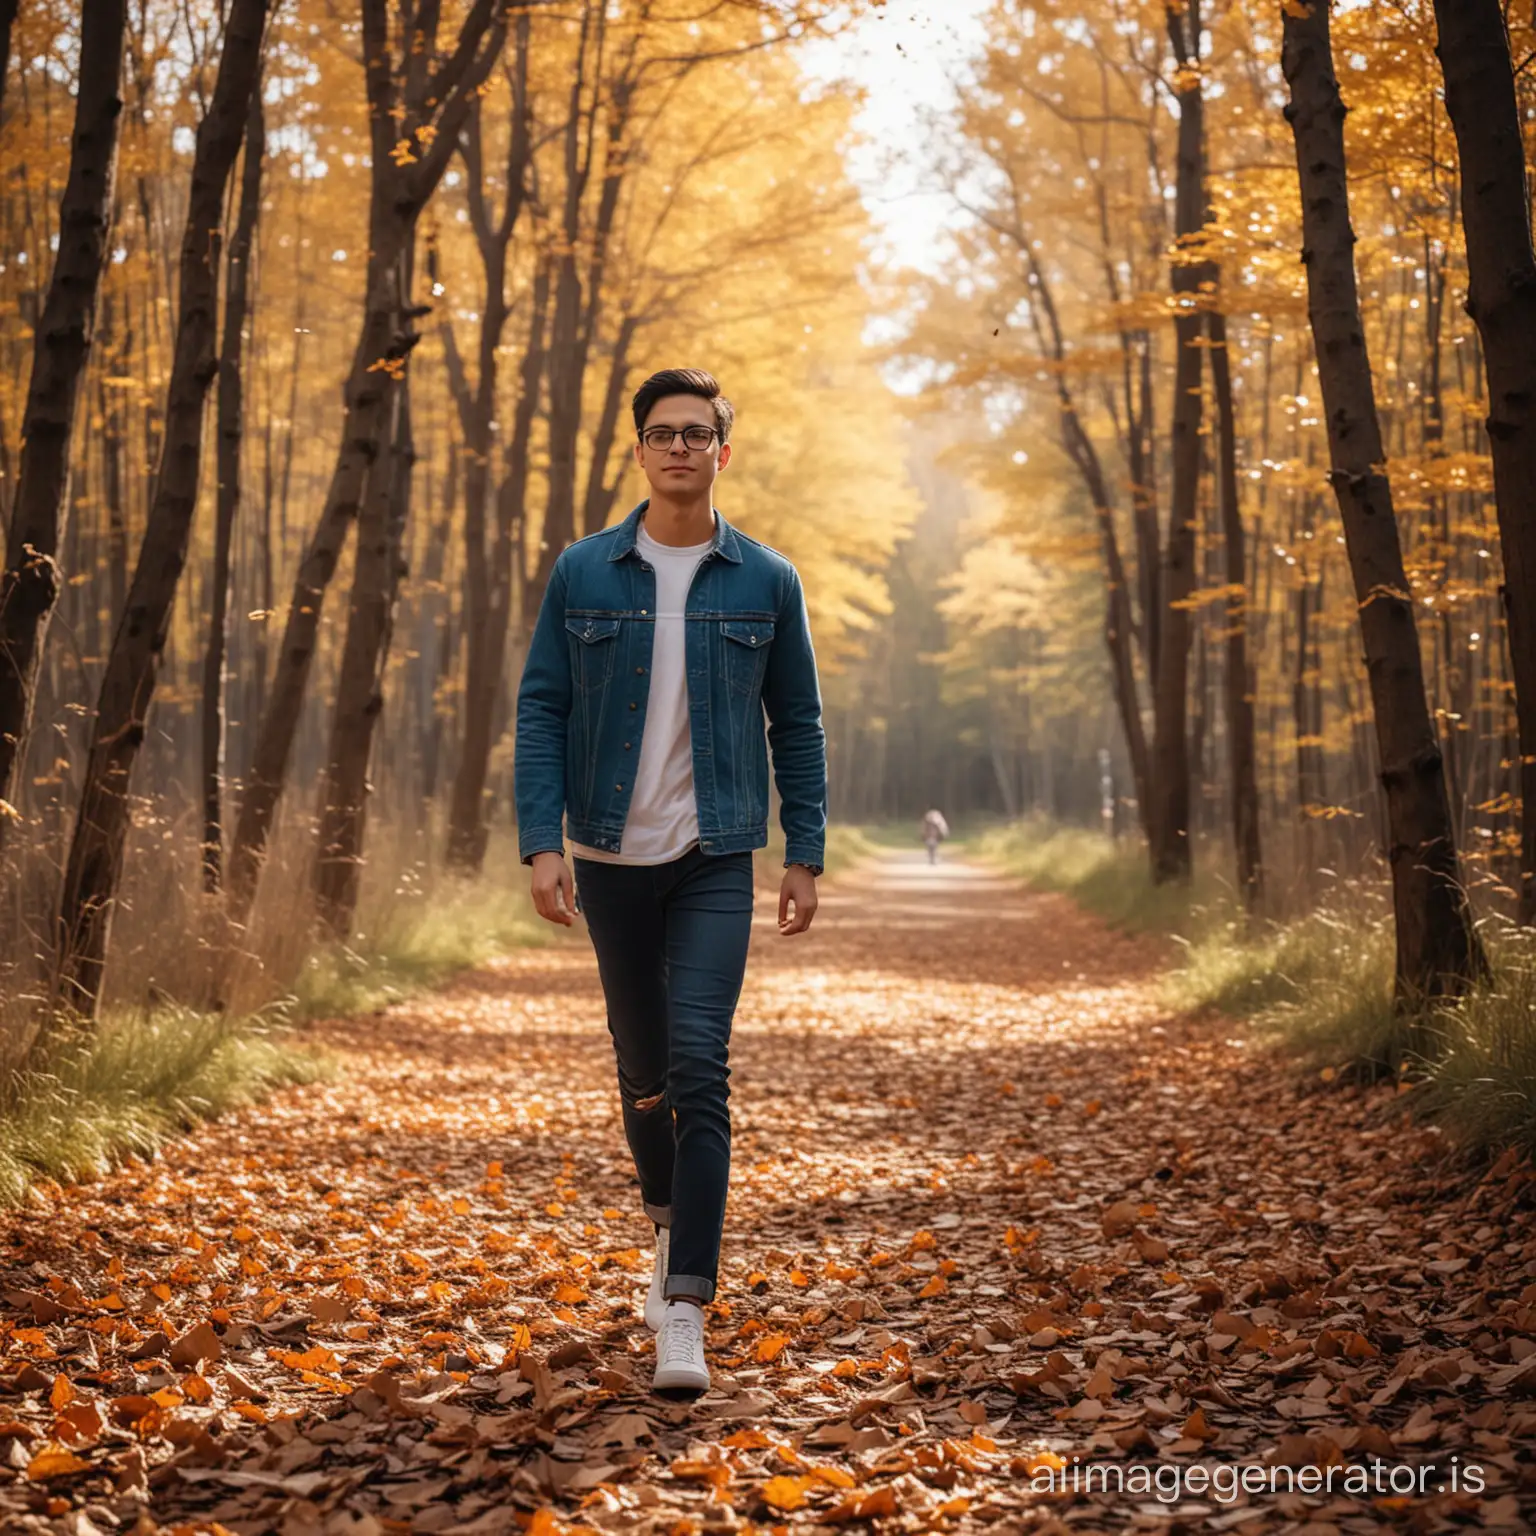 Handsome-20YearOld-Man-Strolling-in-a-Rustic-Autumn-Forest